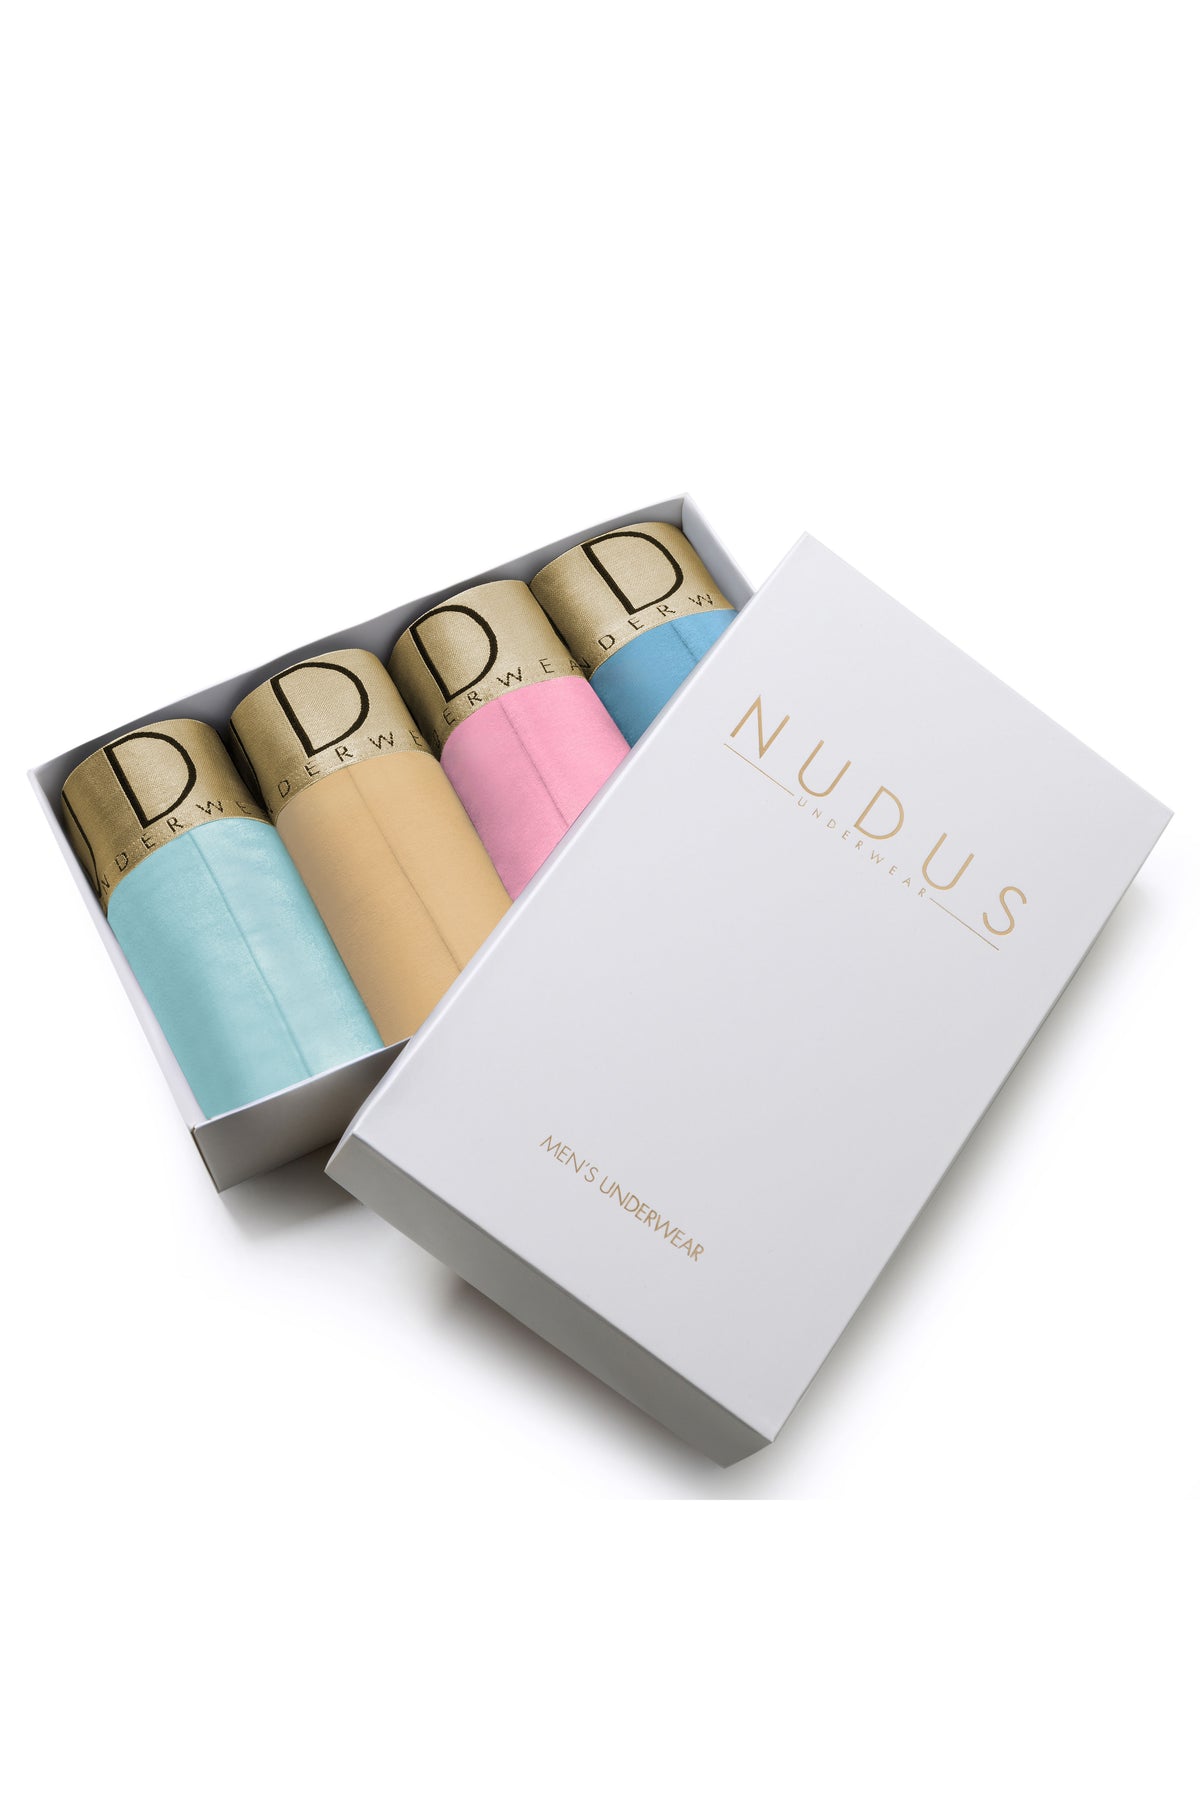 NUDUS Men's Bamboo Briefs - Double Pouch - Pack of 4 - Gift Box